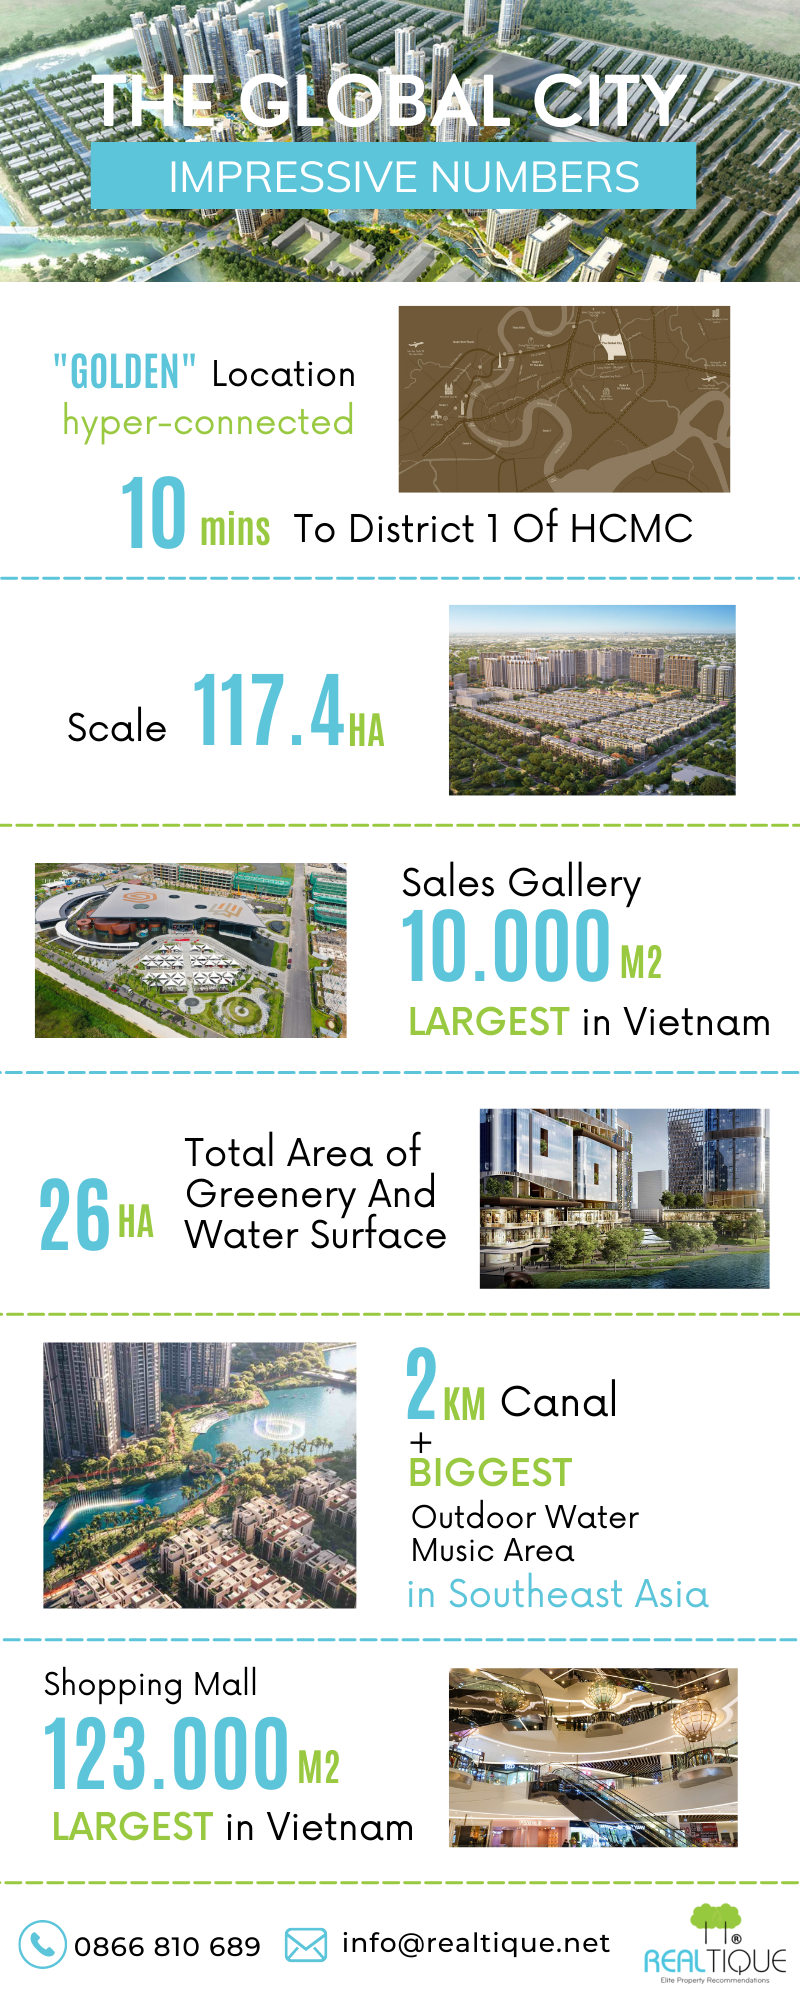 The Largest Sales Gallery In Vietnam At The Global City